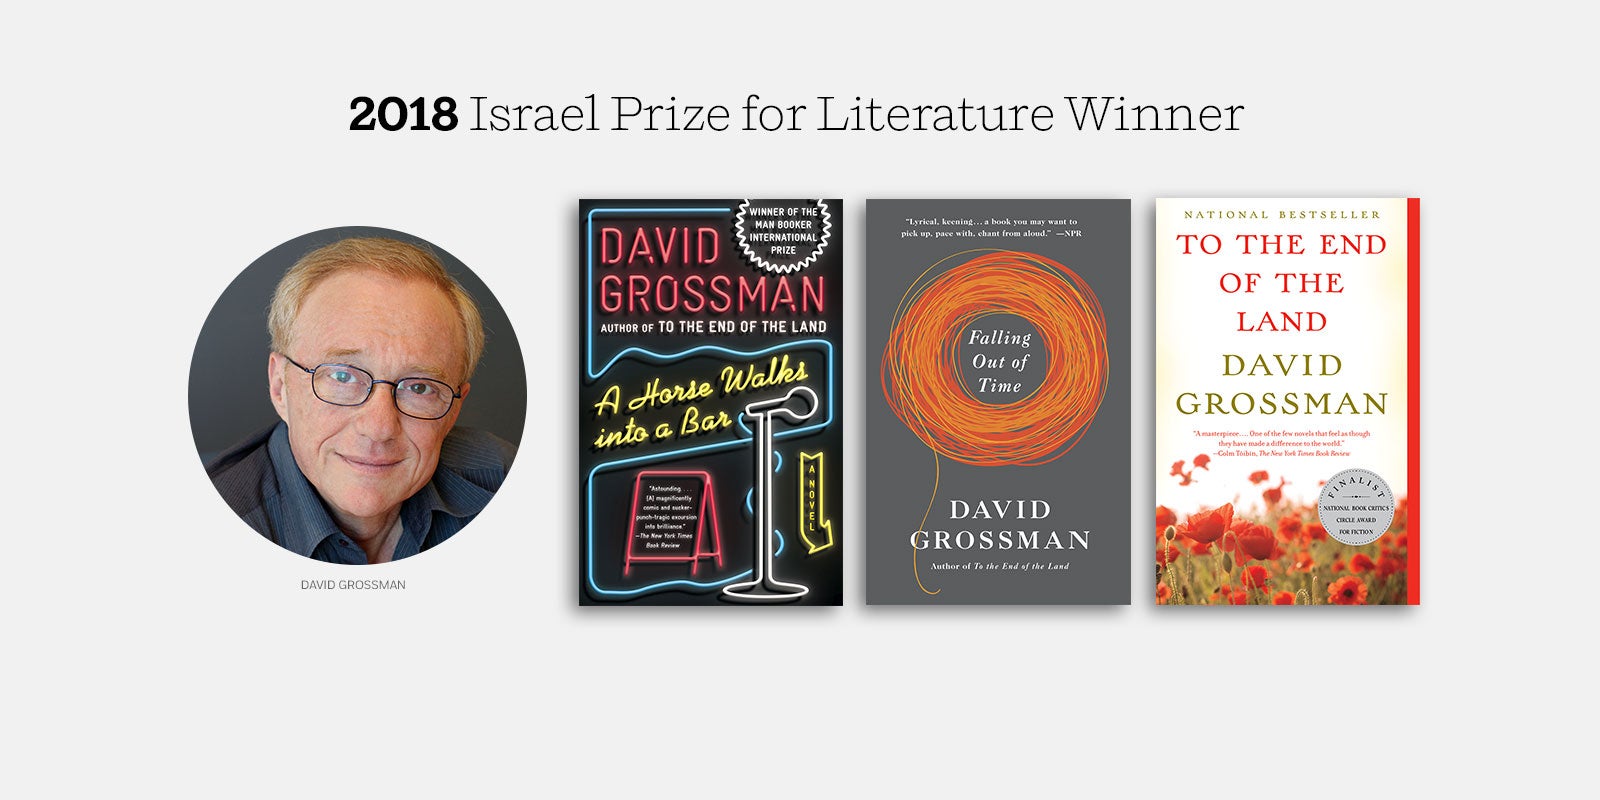 David Grossman has been awarded the 2018 Israel Prize for Literature